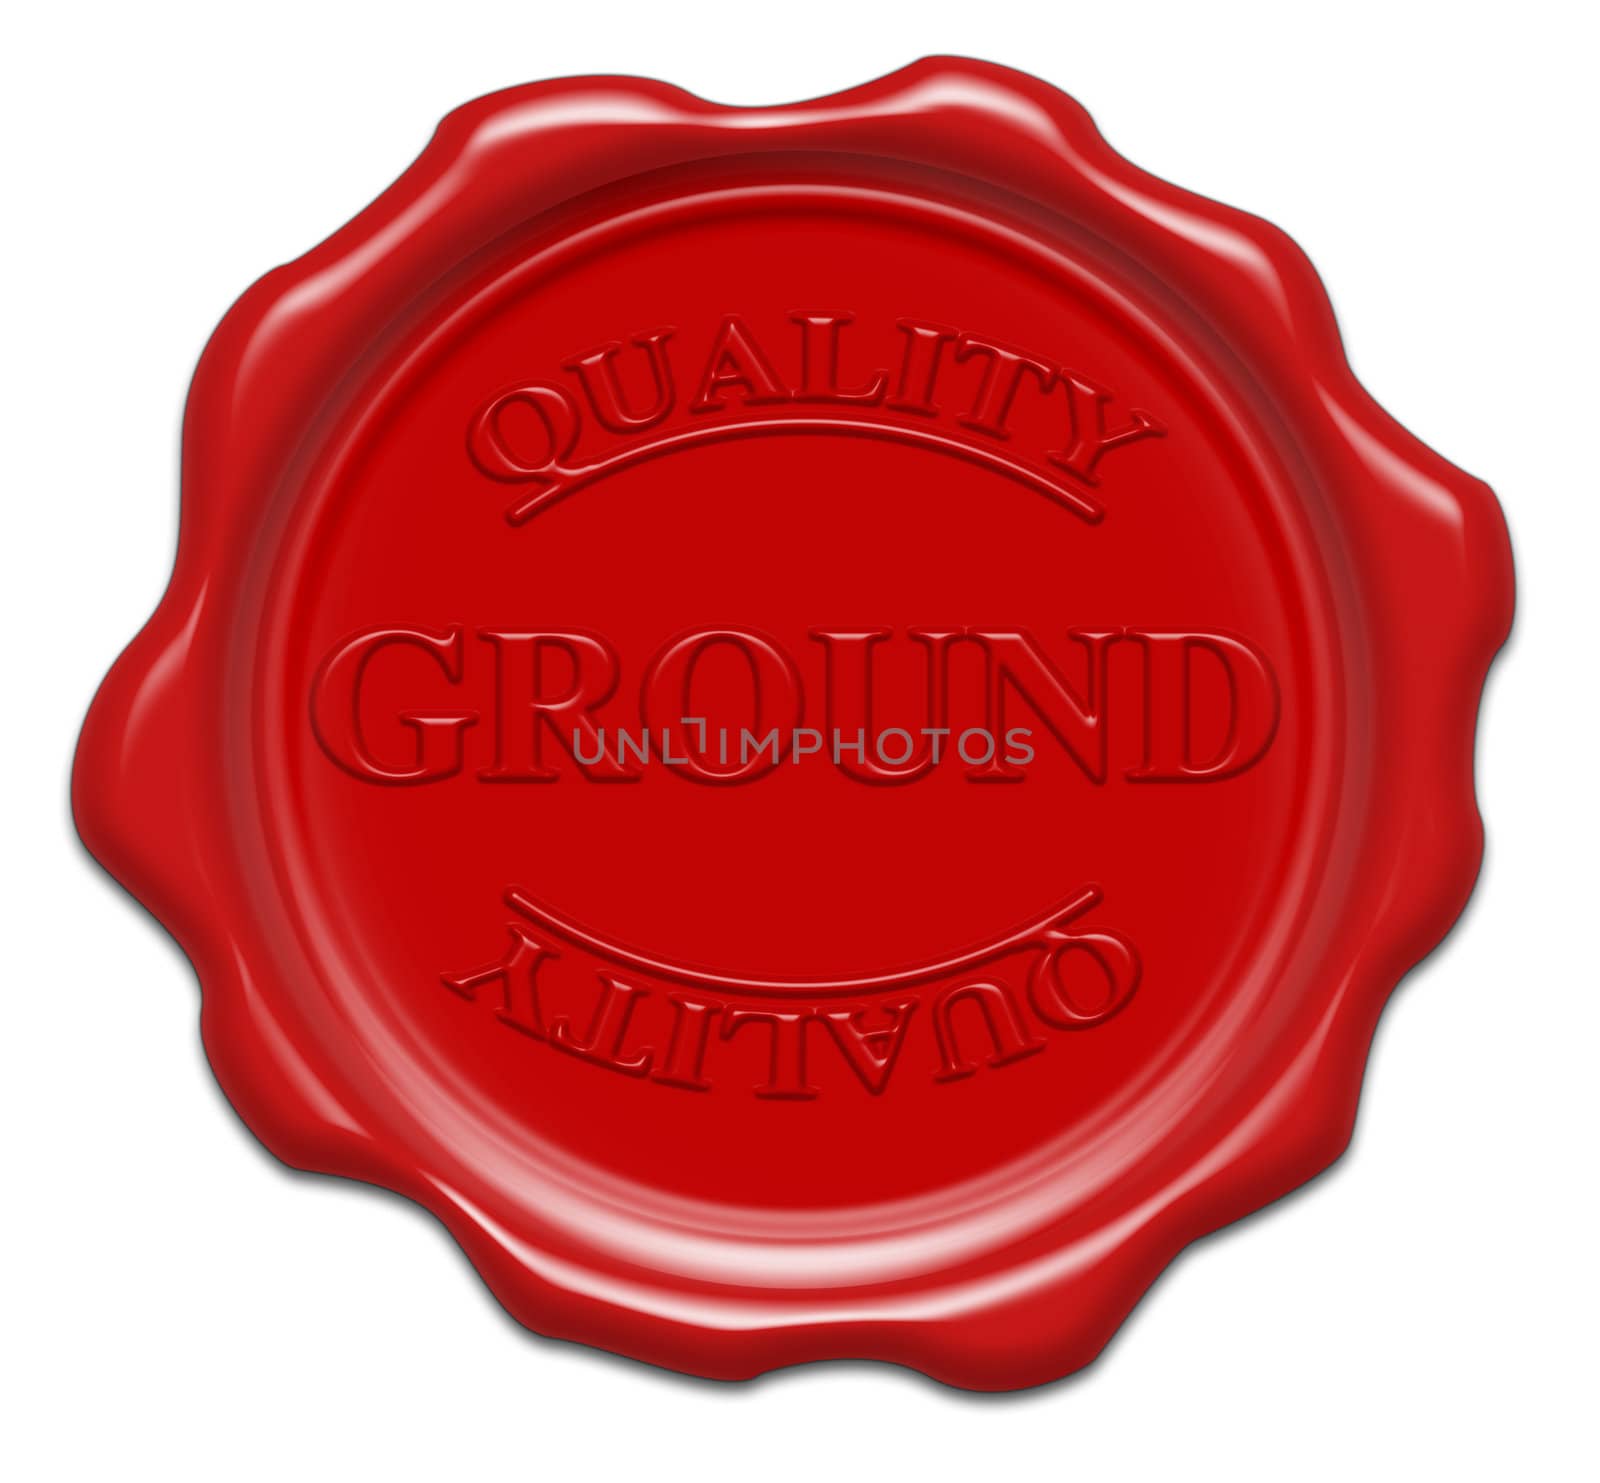 quality ground - illustration red wax seal isolated on white background with word : ground